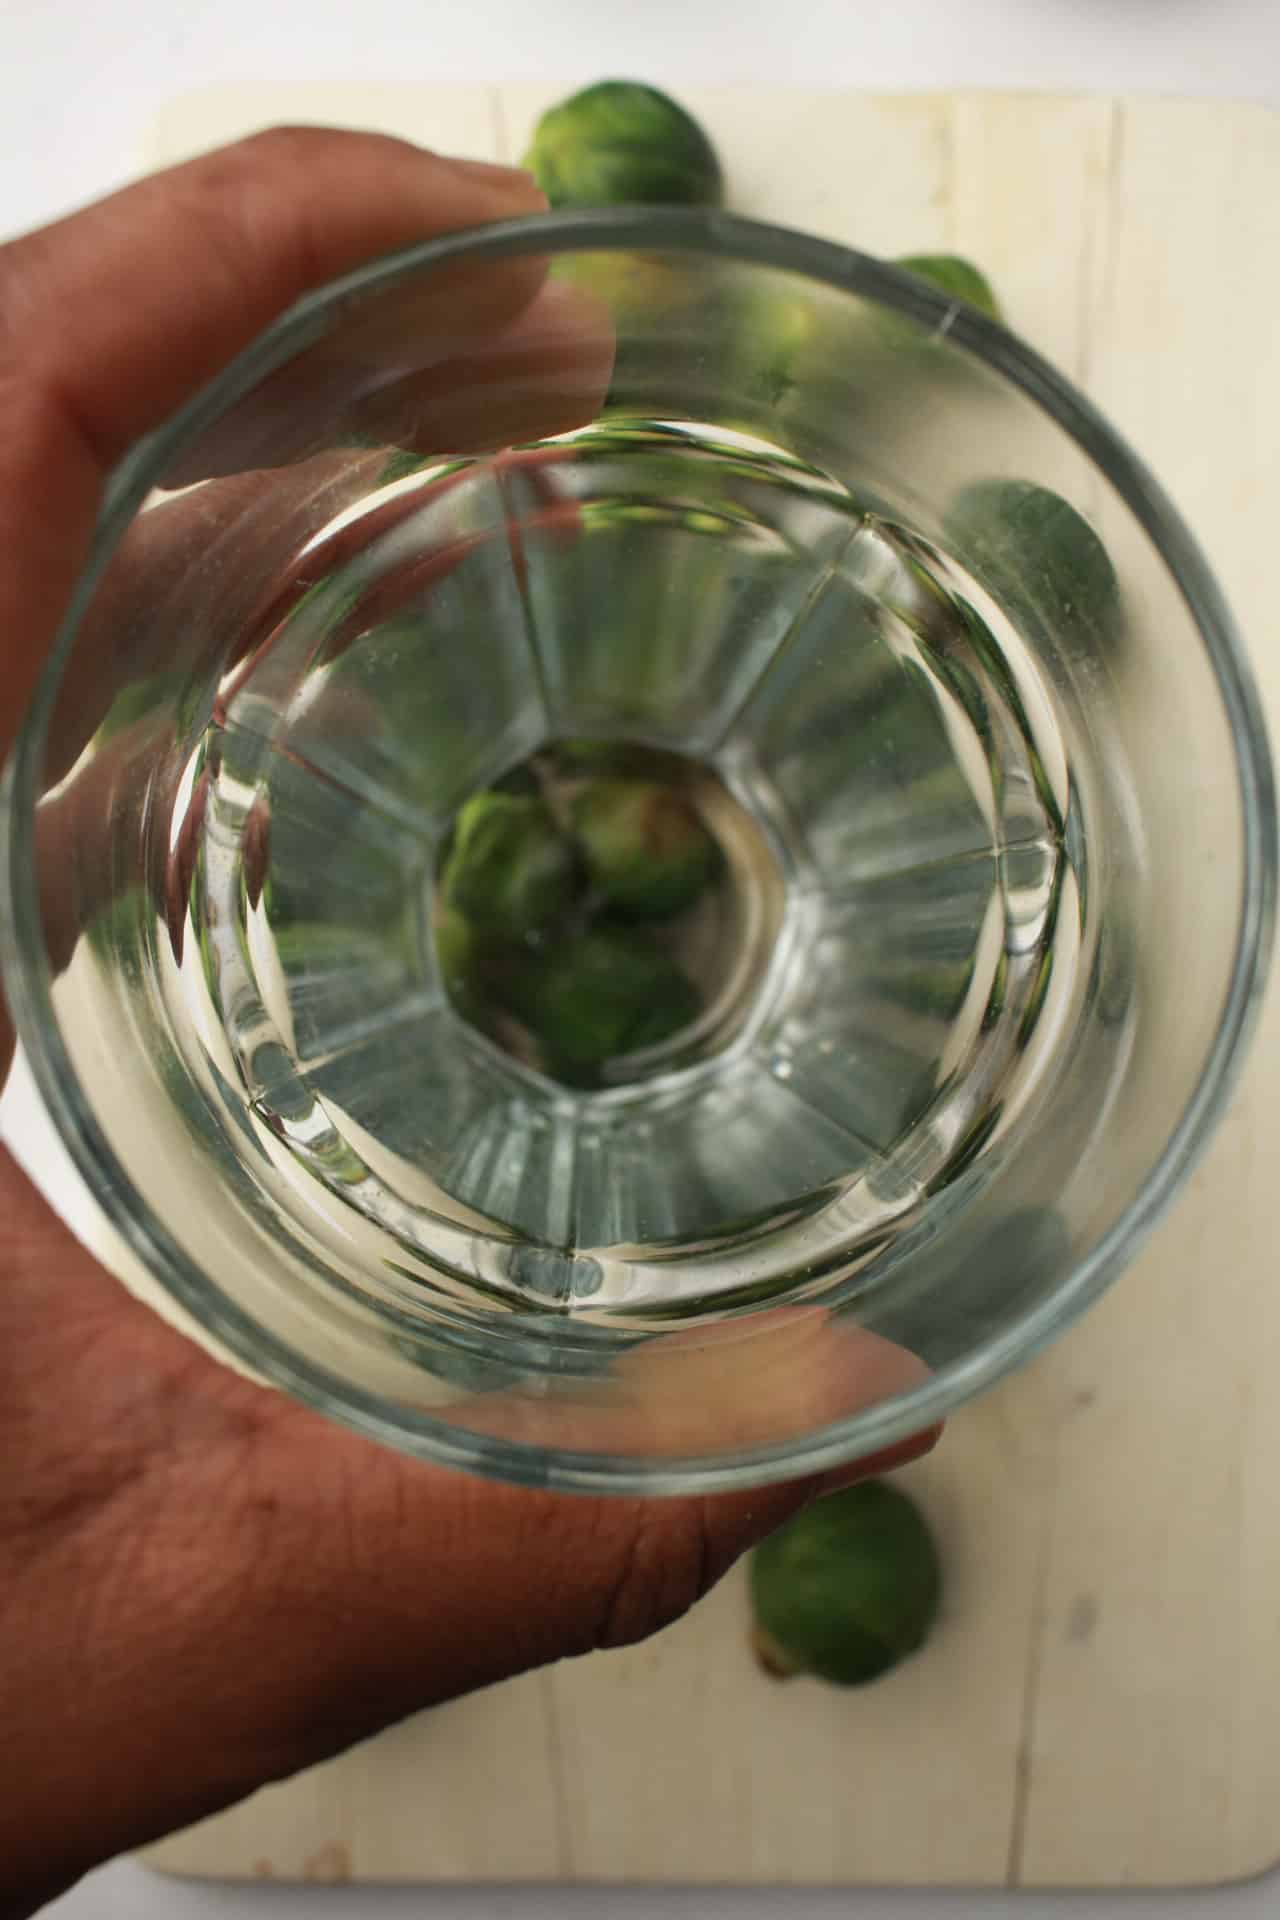 Smashing  brussel sprouts with a glass